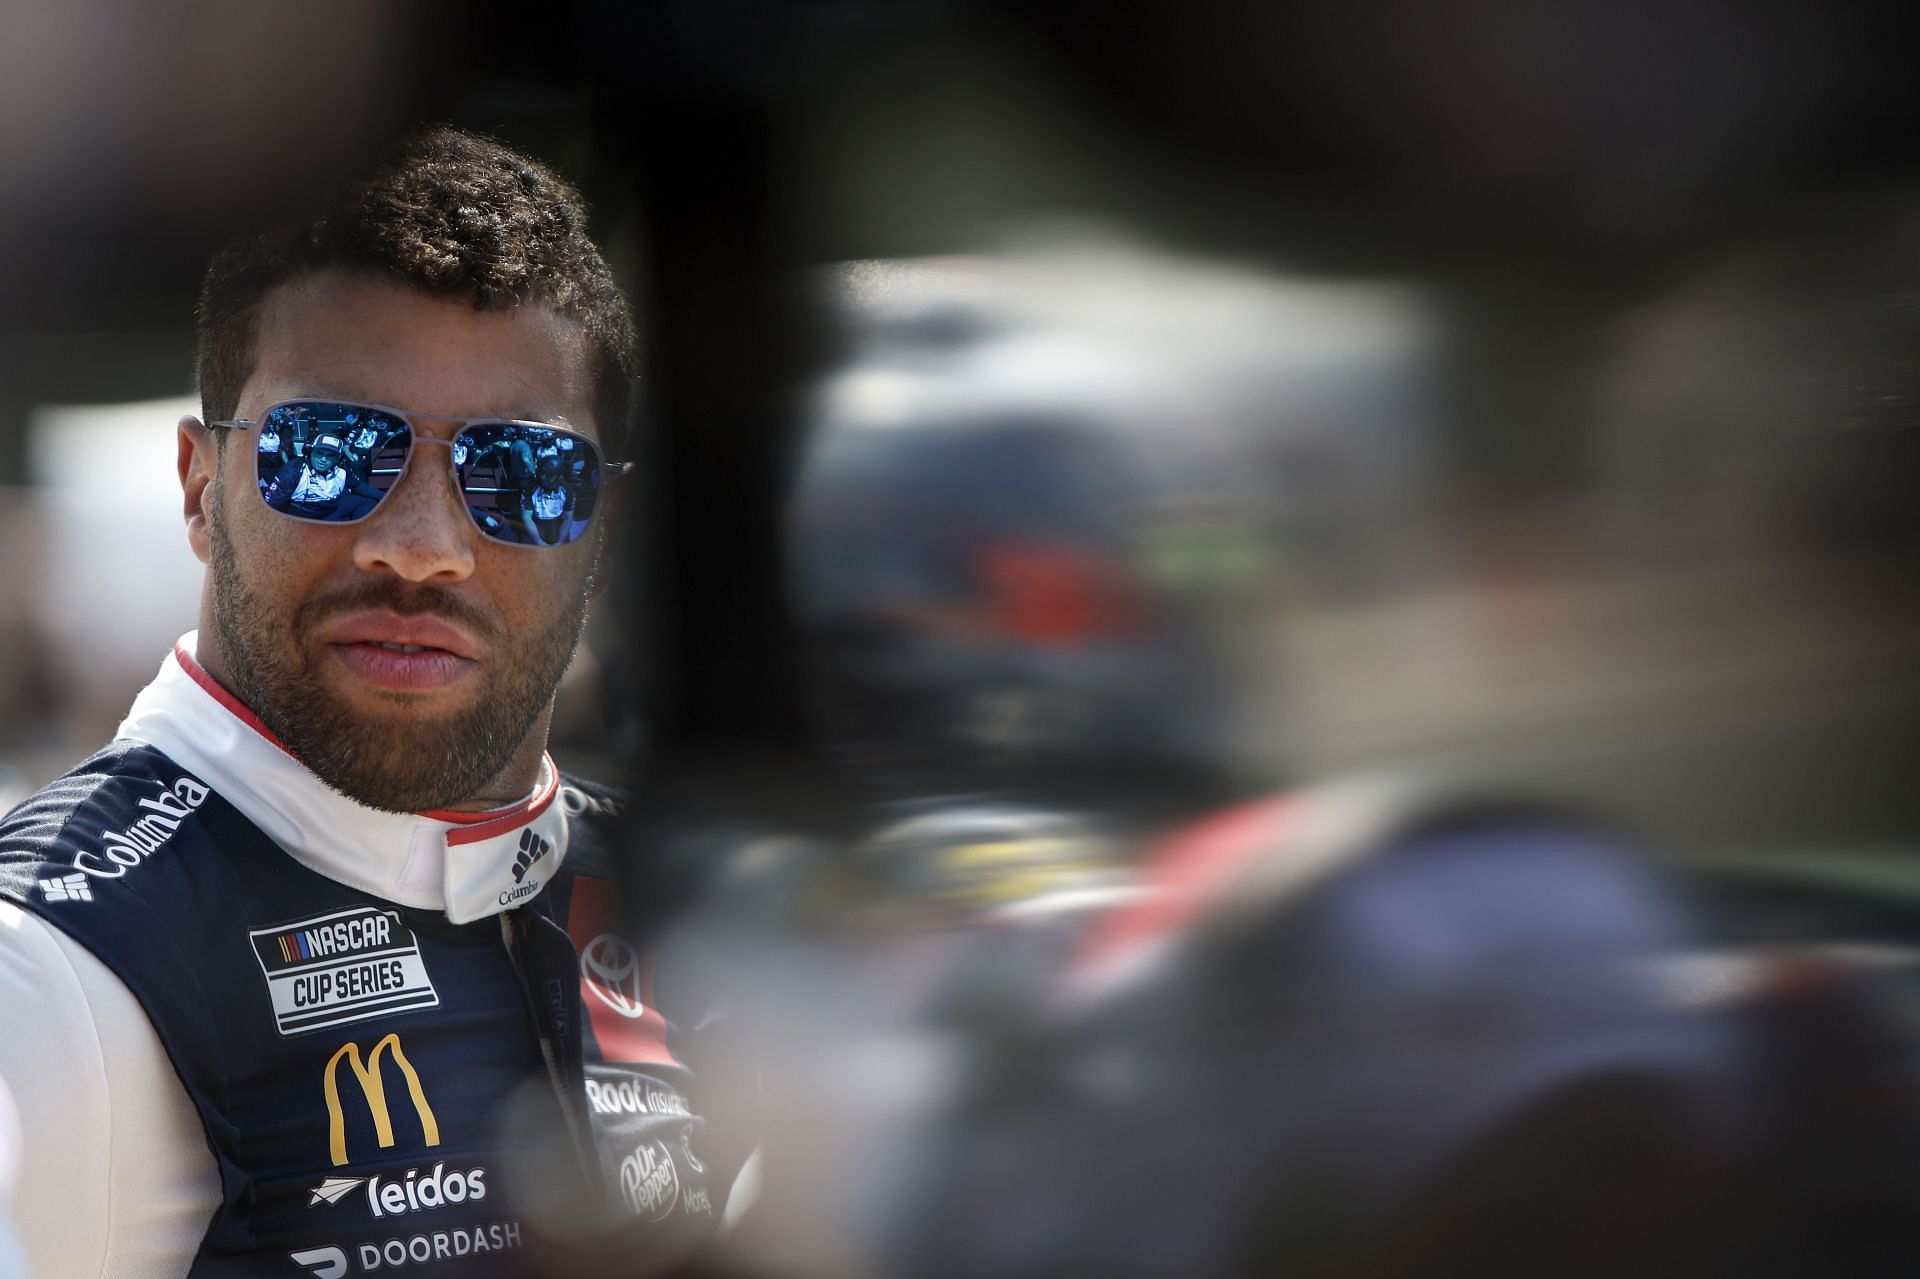 Bubba Wallace Jr. looks on during practice for the 2022 NASCAR Cup Series Kwik Trip 250 at Road America in Elkhart Lake, Wisconsin. (Photo by Sean Gardner/Getty Images)